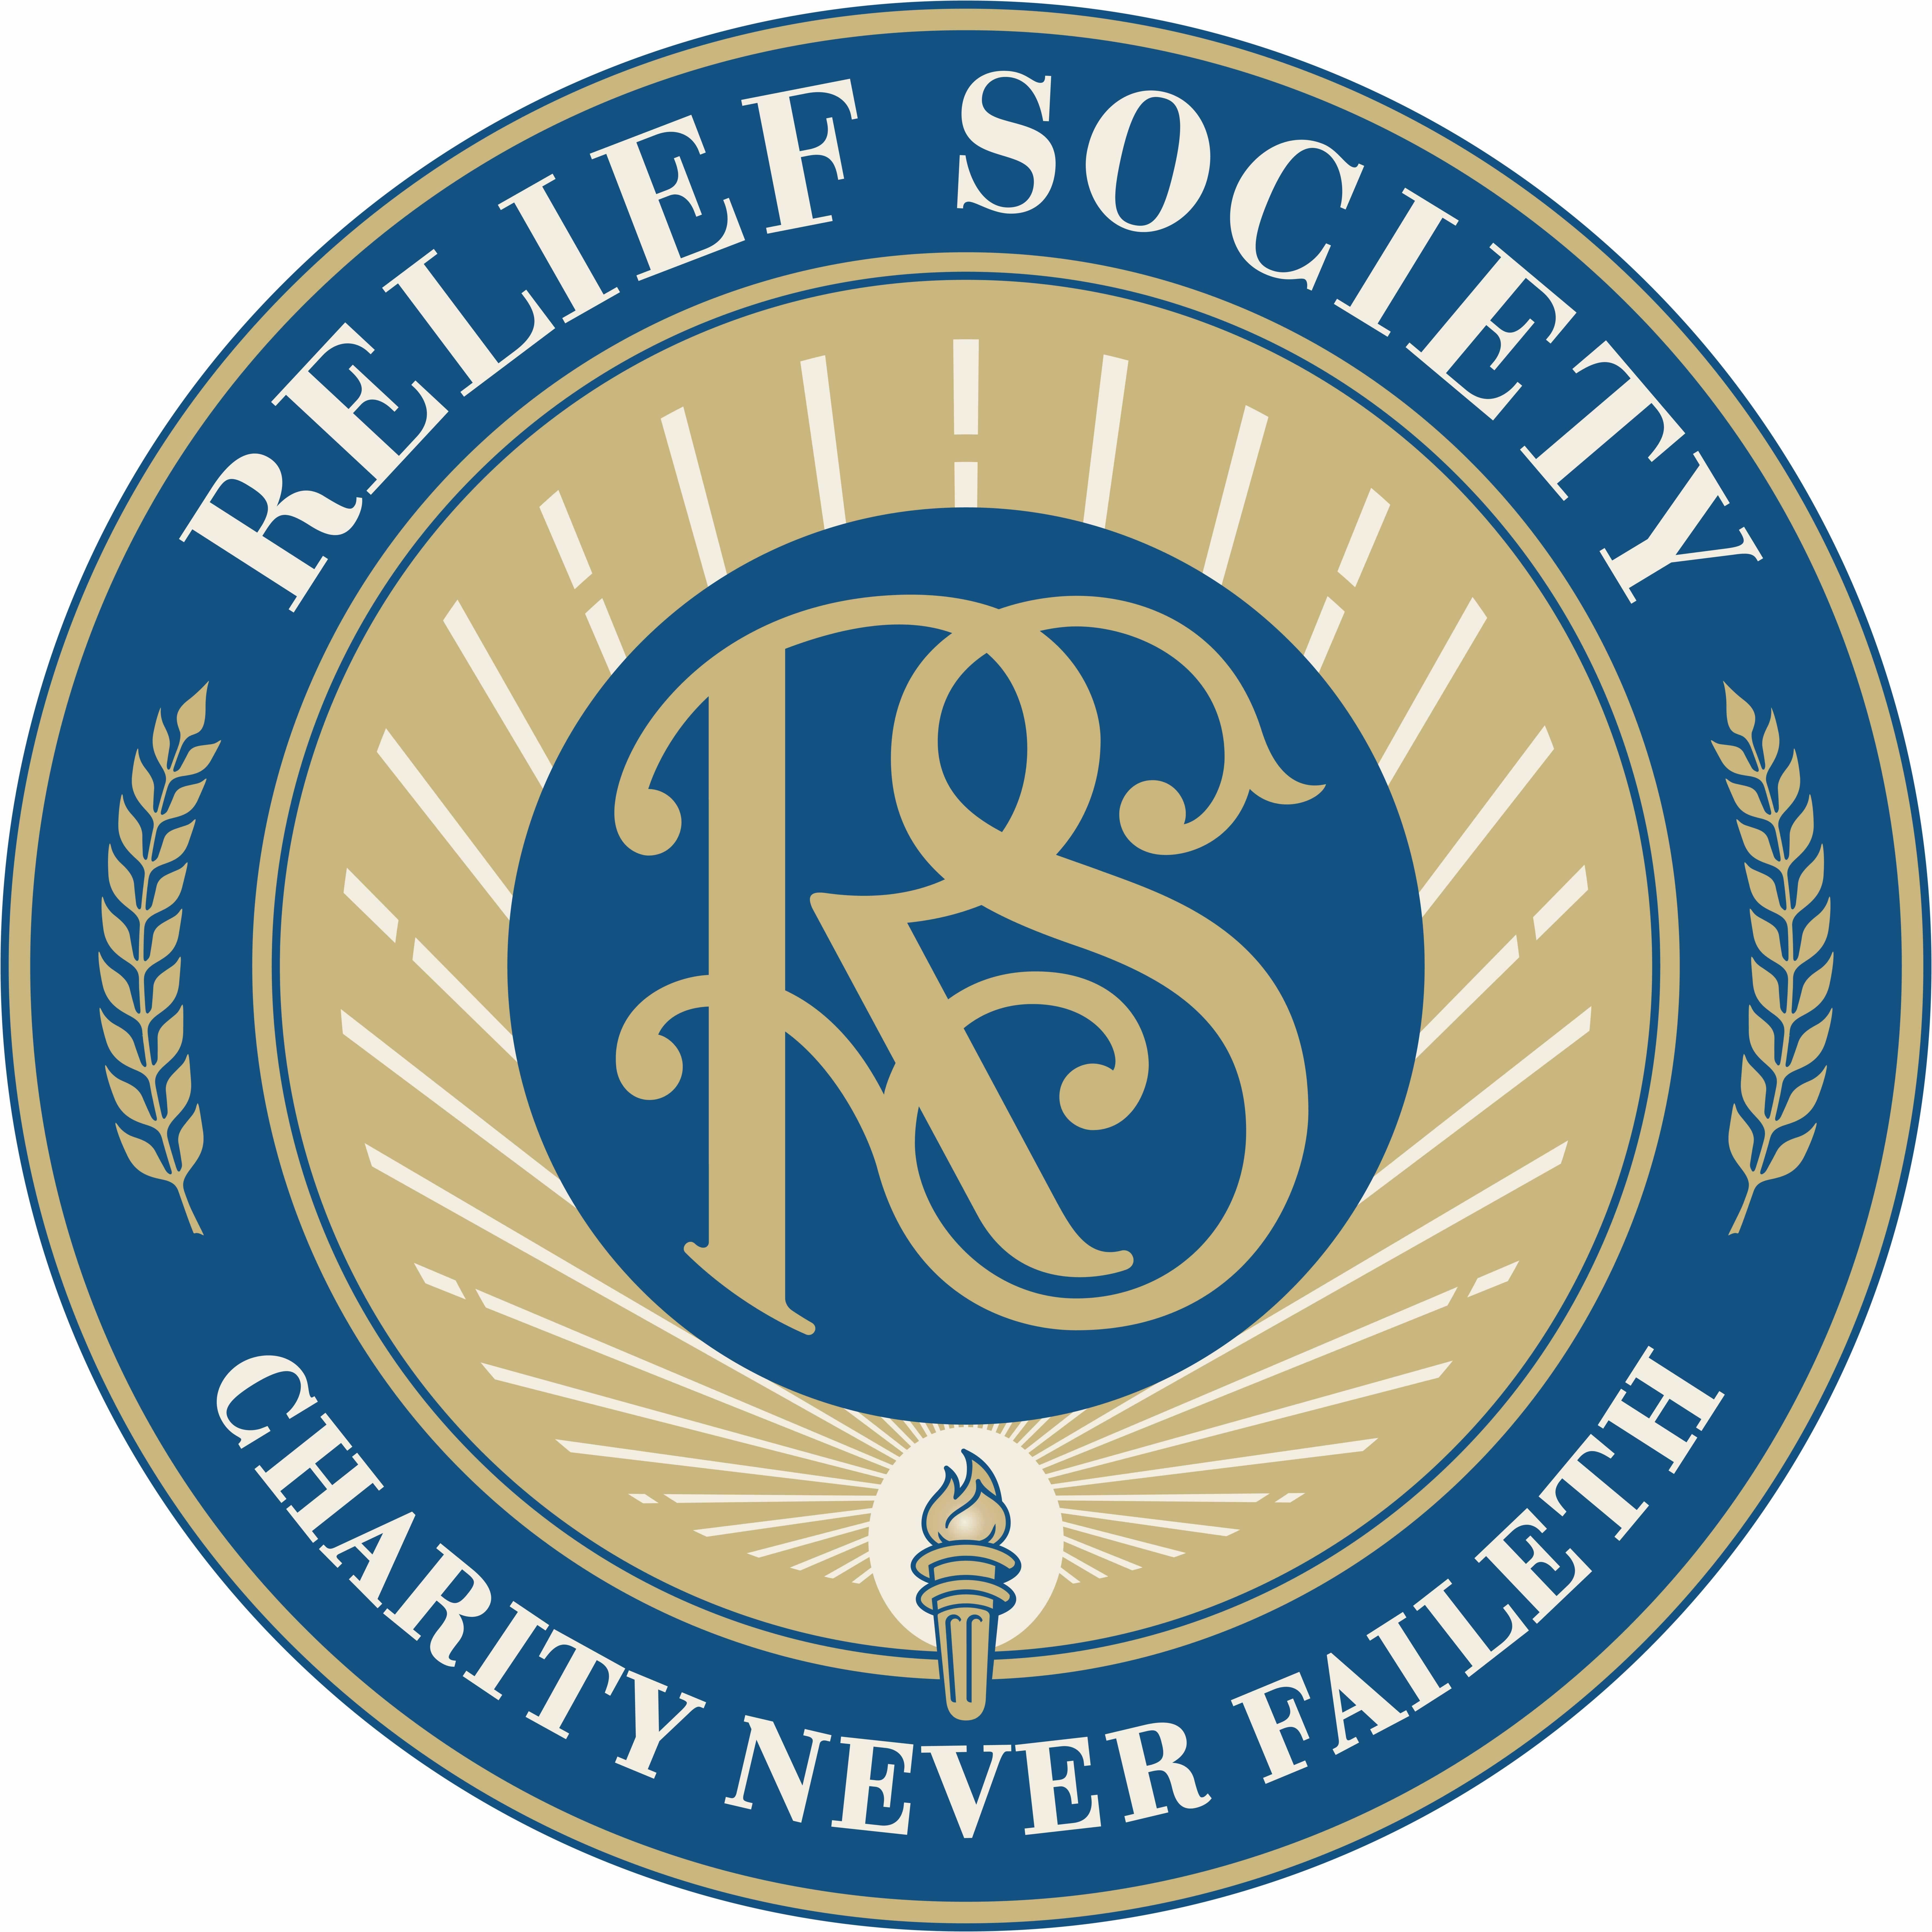 The Relief Society seal in color.